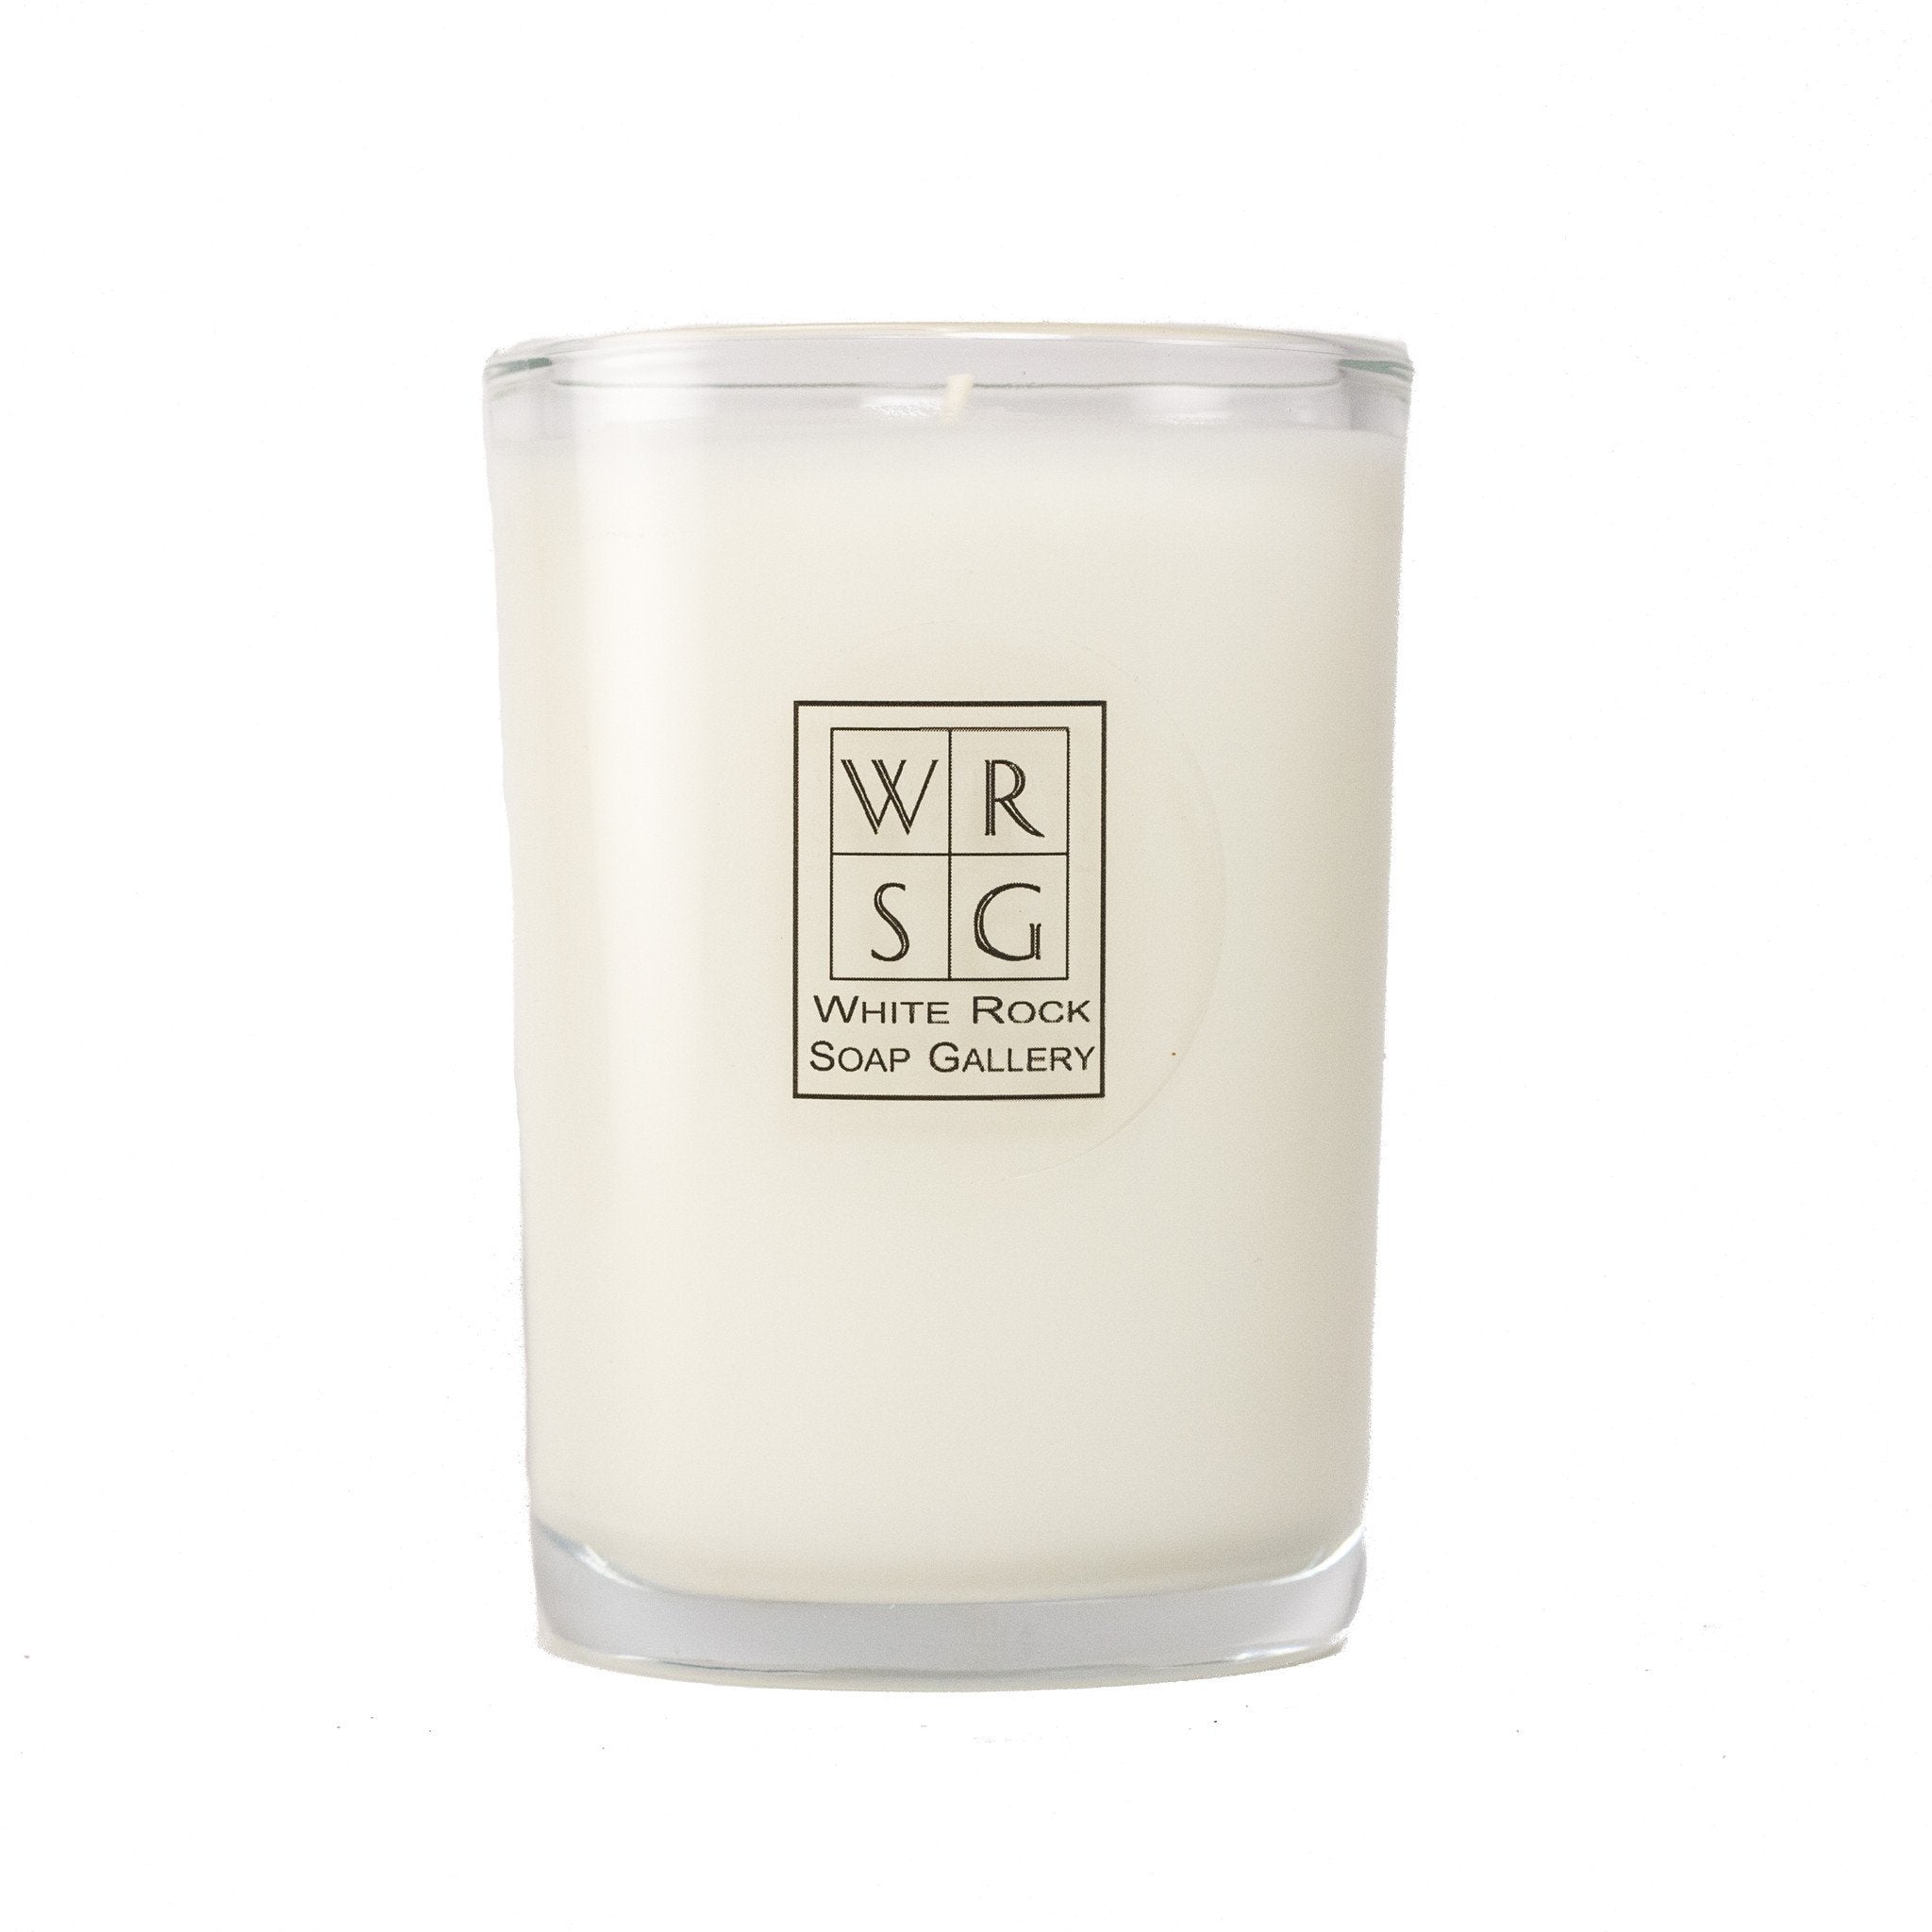 8 oz Glass Soy Wax Candle - White Rock Soap Gallery